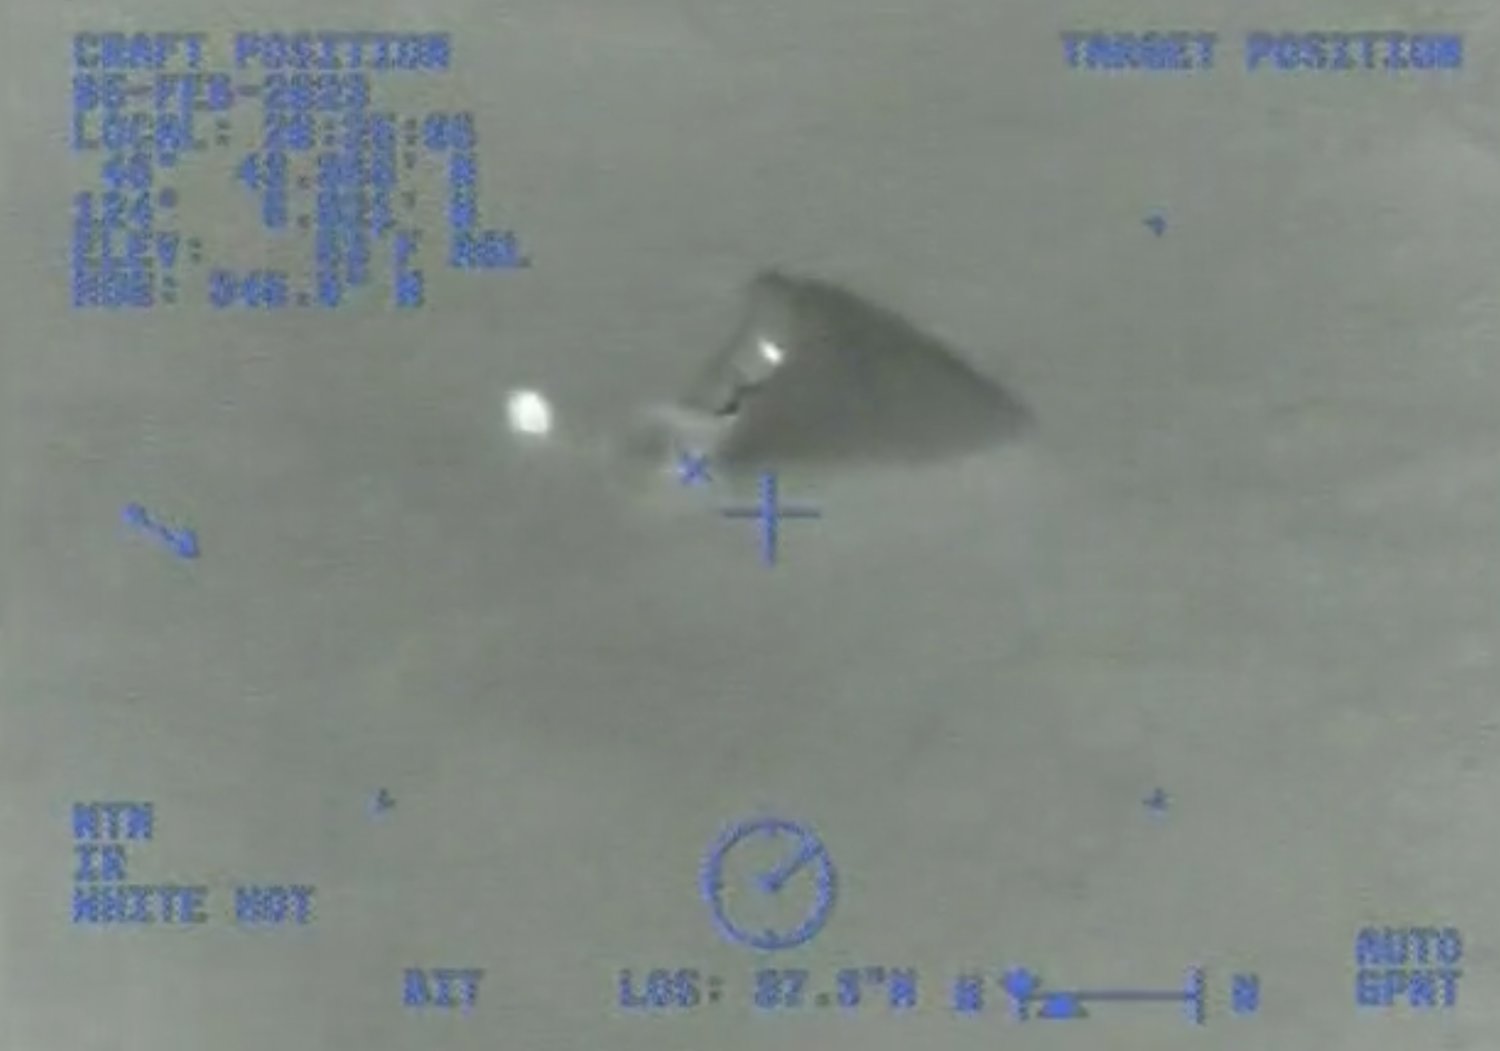 A raft is pictured floating in this still from a Coast Guard video of a rescue off the Southwest Washington Coast on Sunday night.